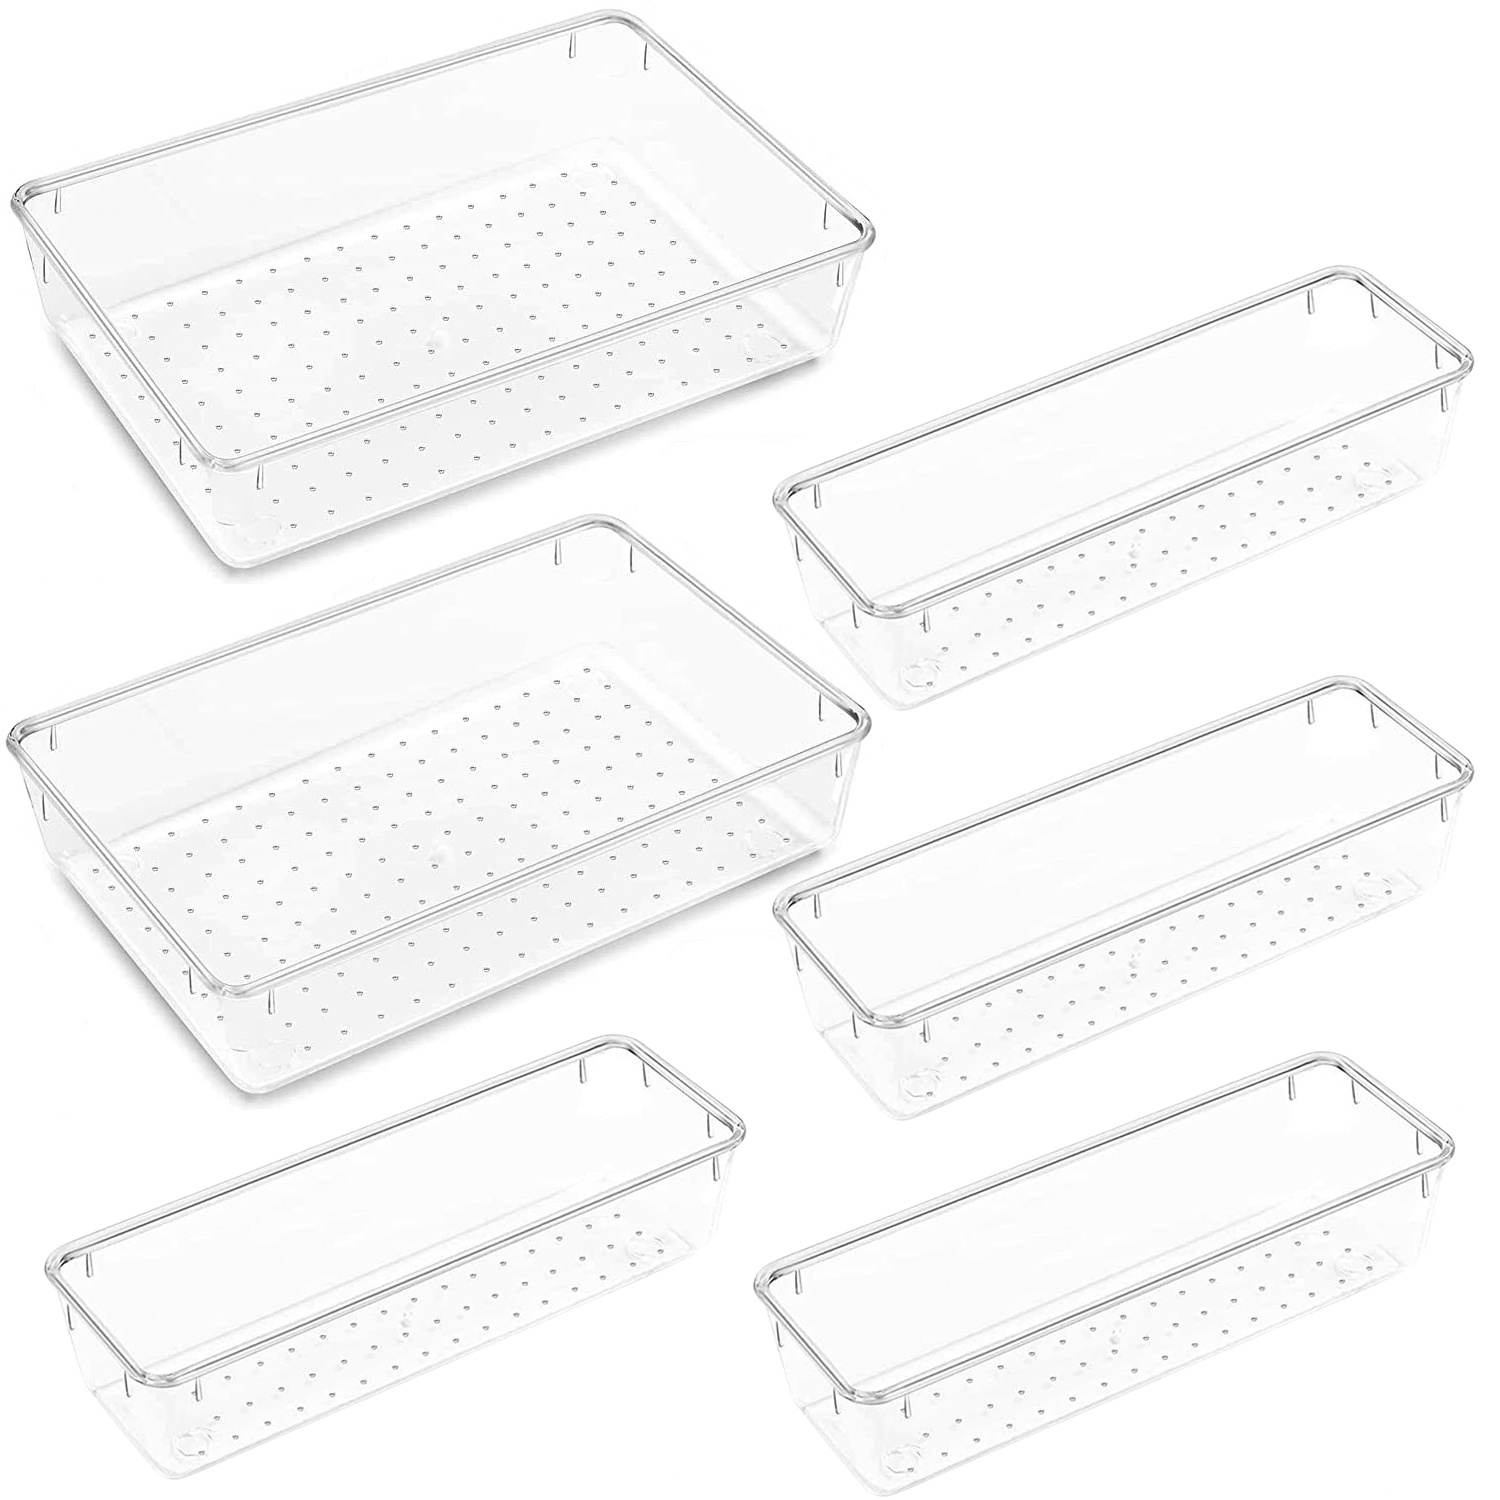  CHANCETSUI 9 Pcs Large Clear Plastic Drawer Organizers, Stackable  Bathroom Drawer Organizers Tray, Plastic Vanity Trays Divider Container  Storage Bins for Makeup, Desk, Kitchen and Office : Home & Kitchen